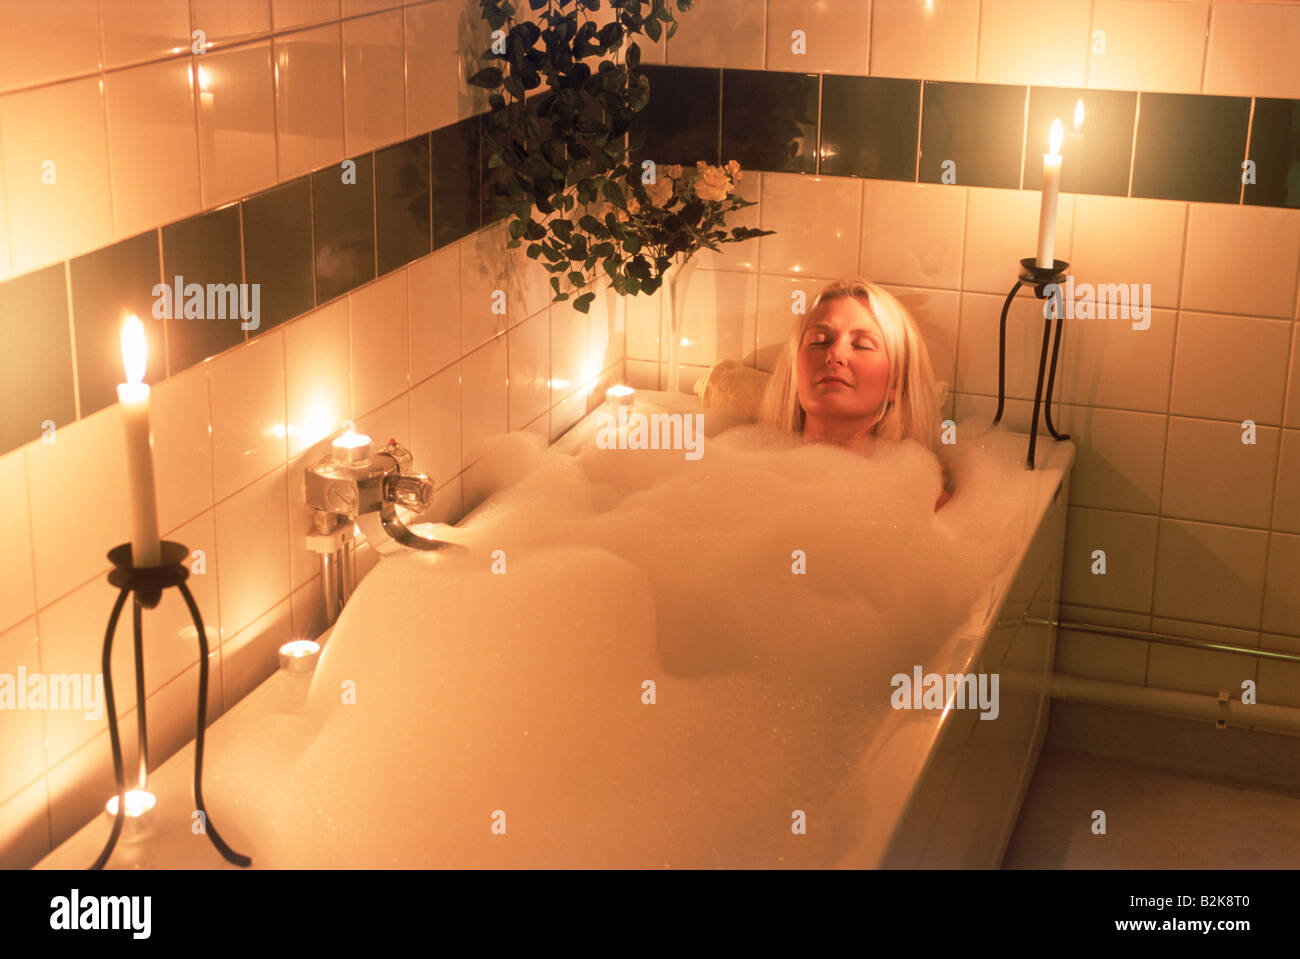 Relaxed blond woman in candle lit bubble bath Stock Photo - Alamy